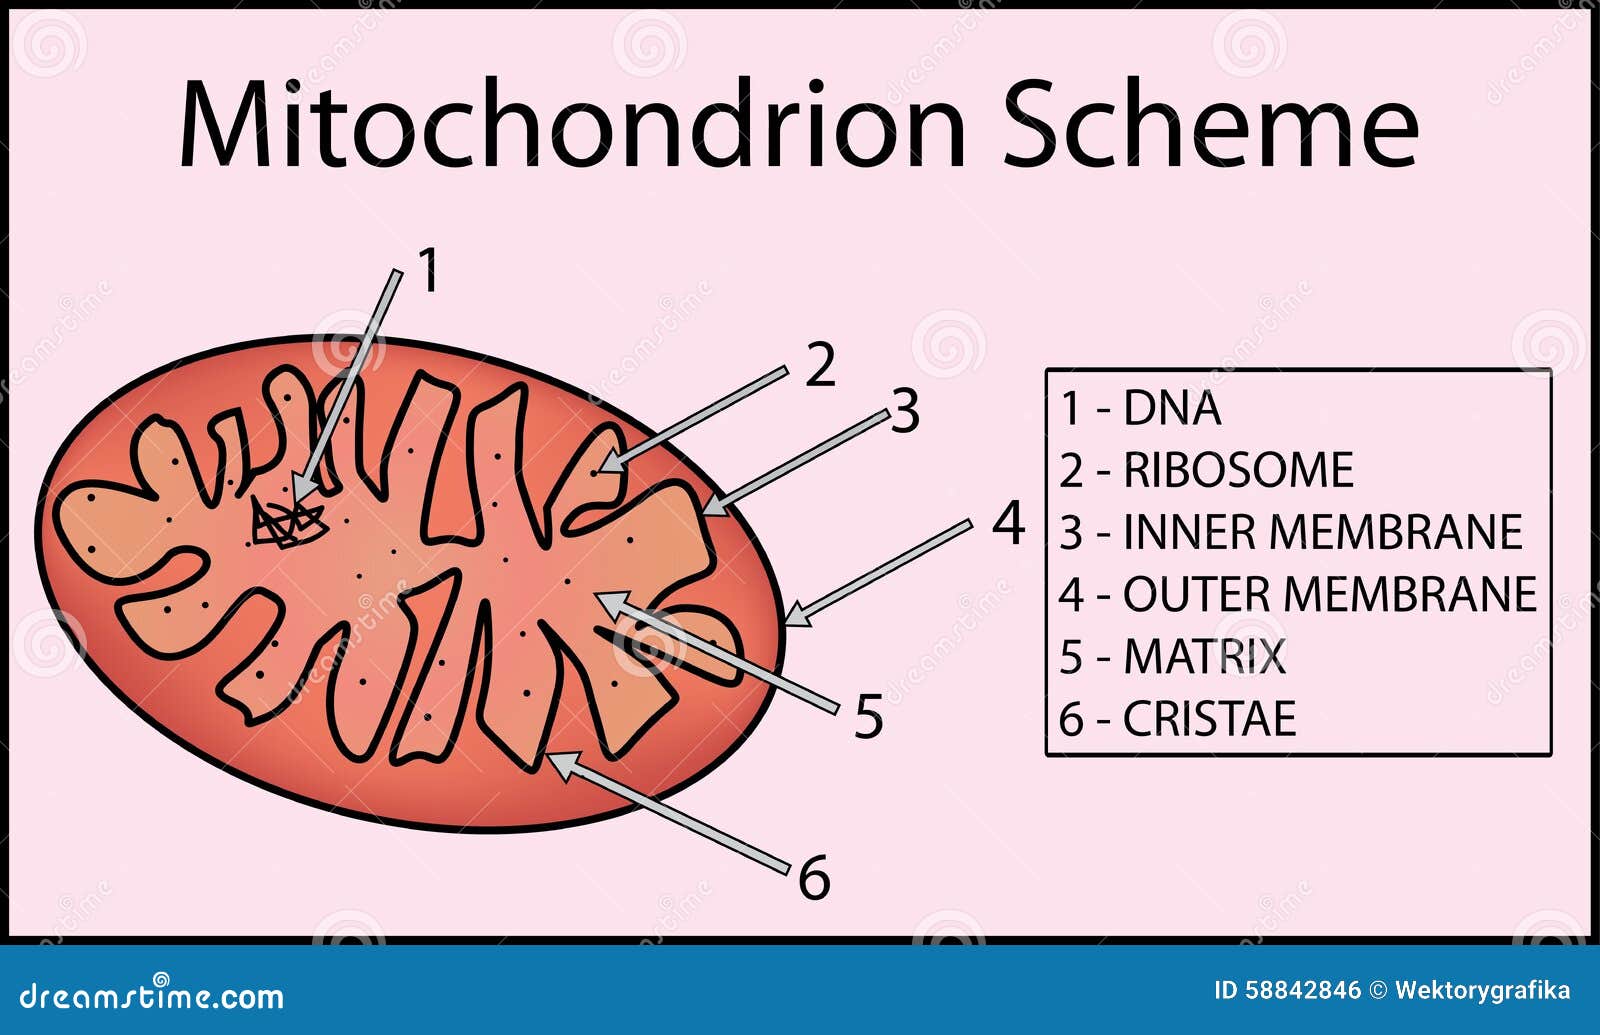 structure mitochondrion organelle. anatomy of mitochondrion